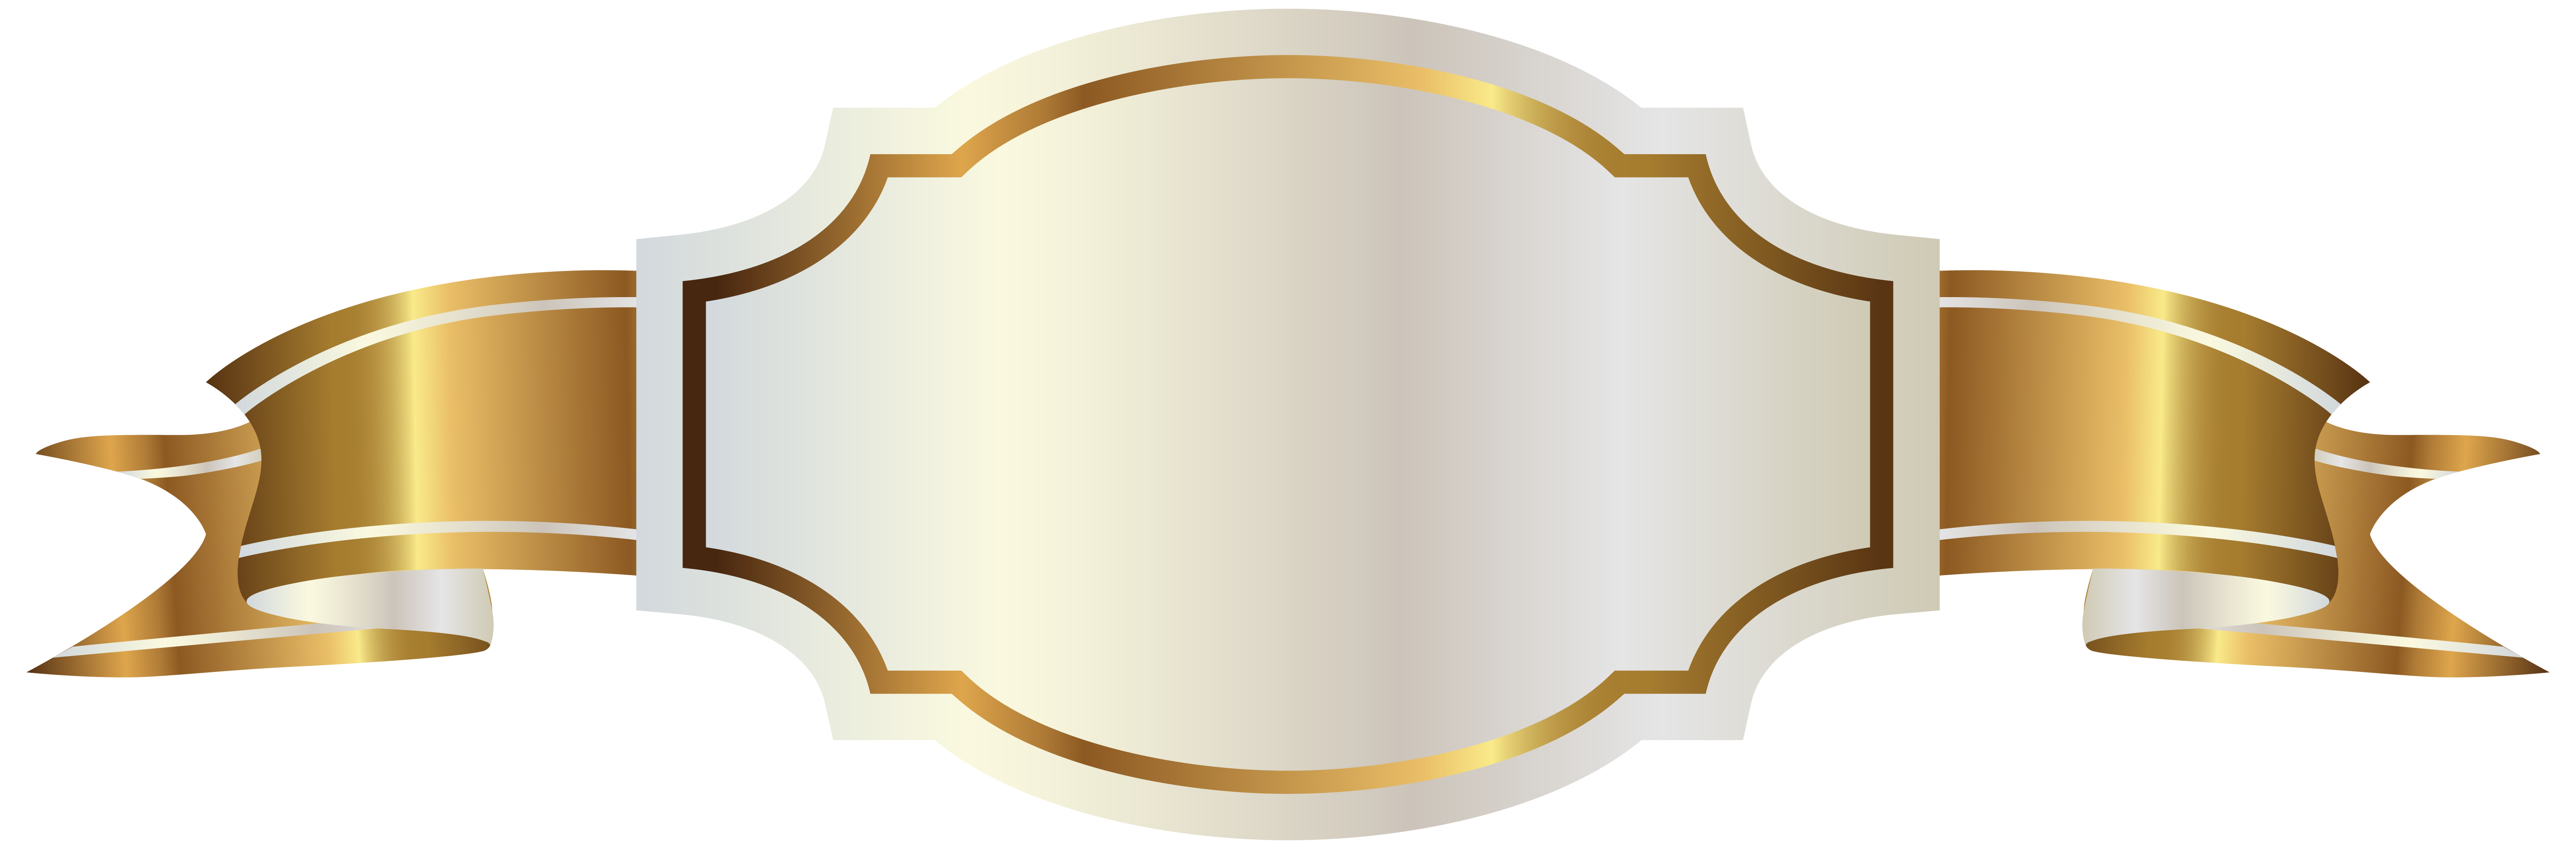 White and gold banner. Flags clipart label